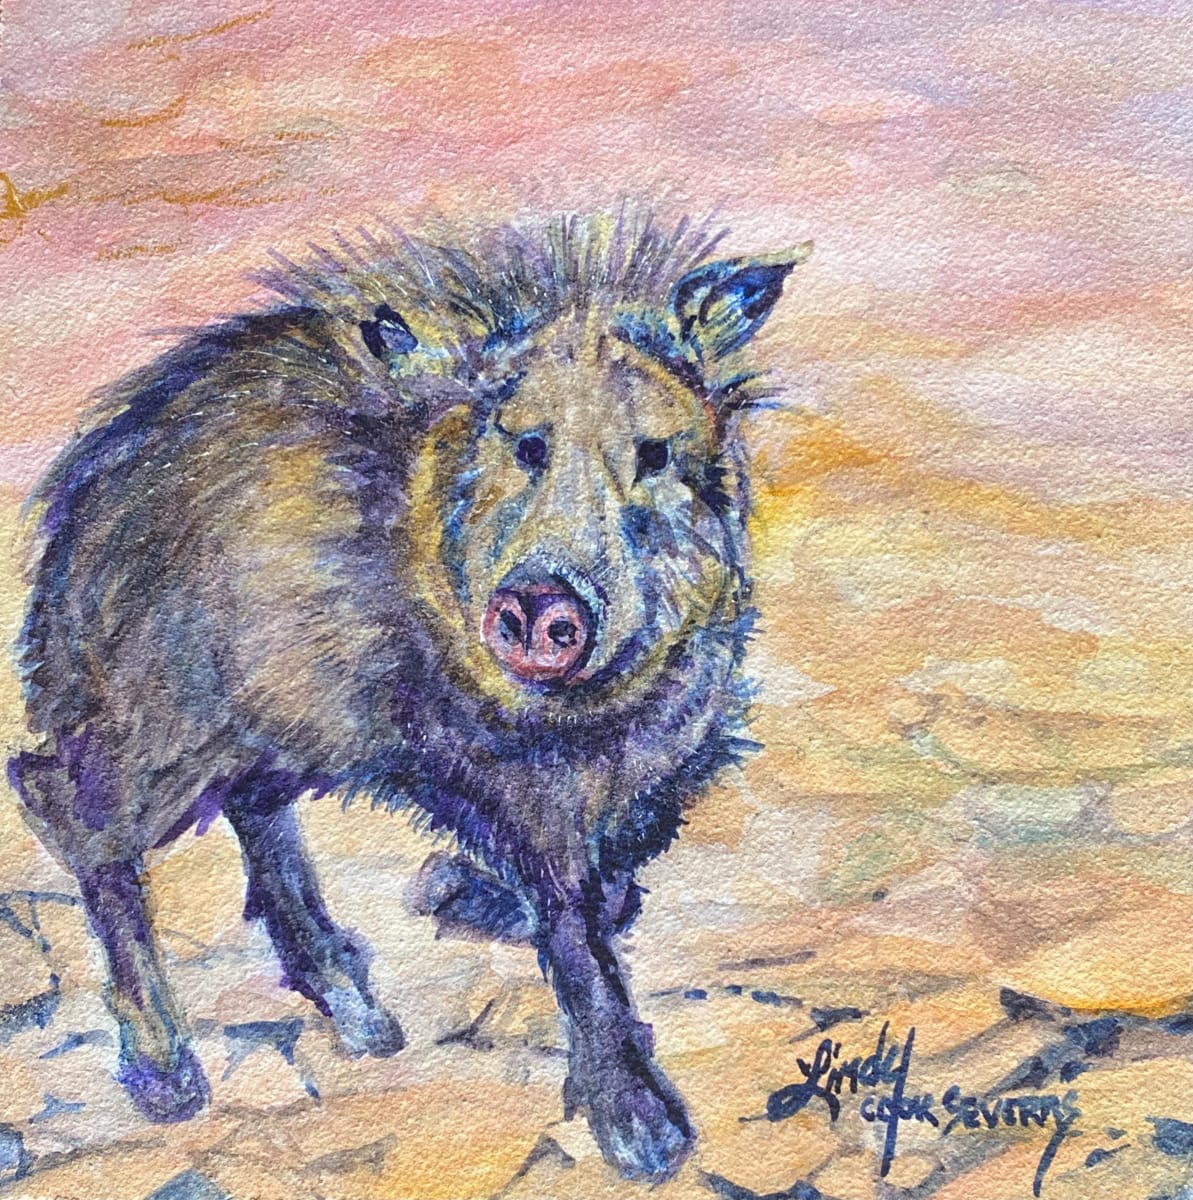 Javelina Howdy by Lindy Cook Severns 